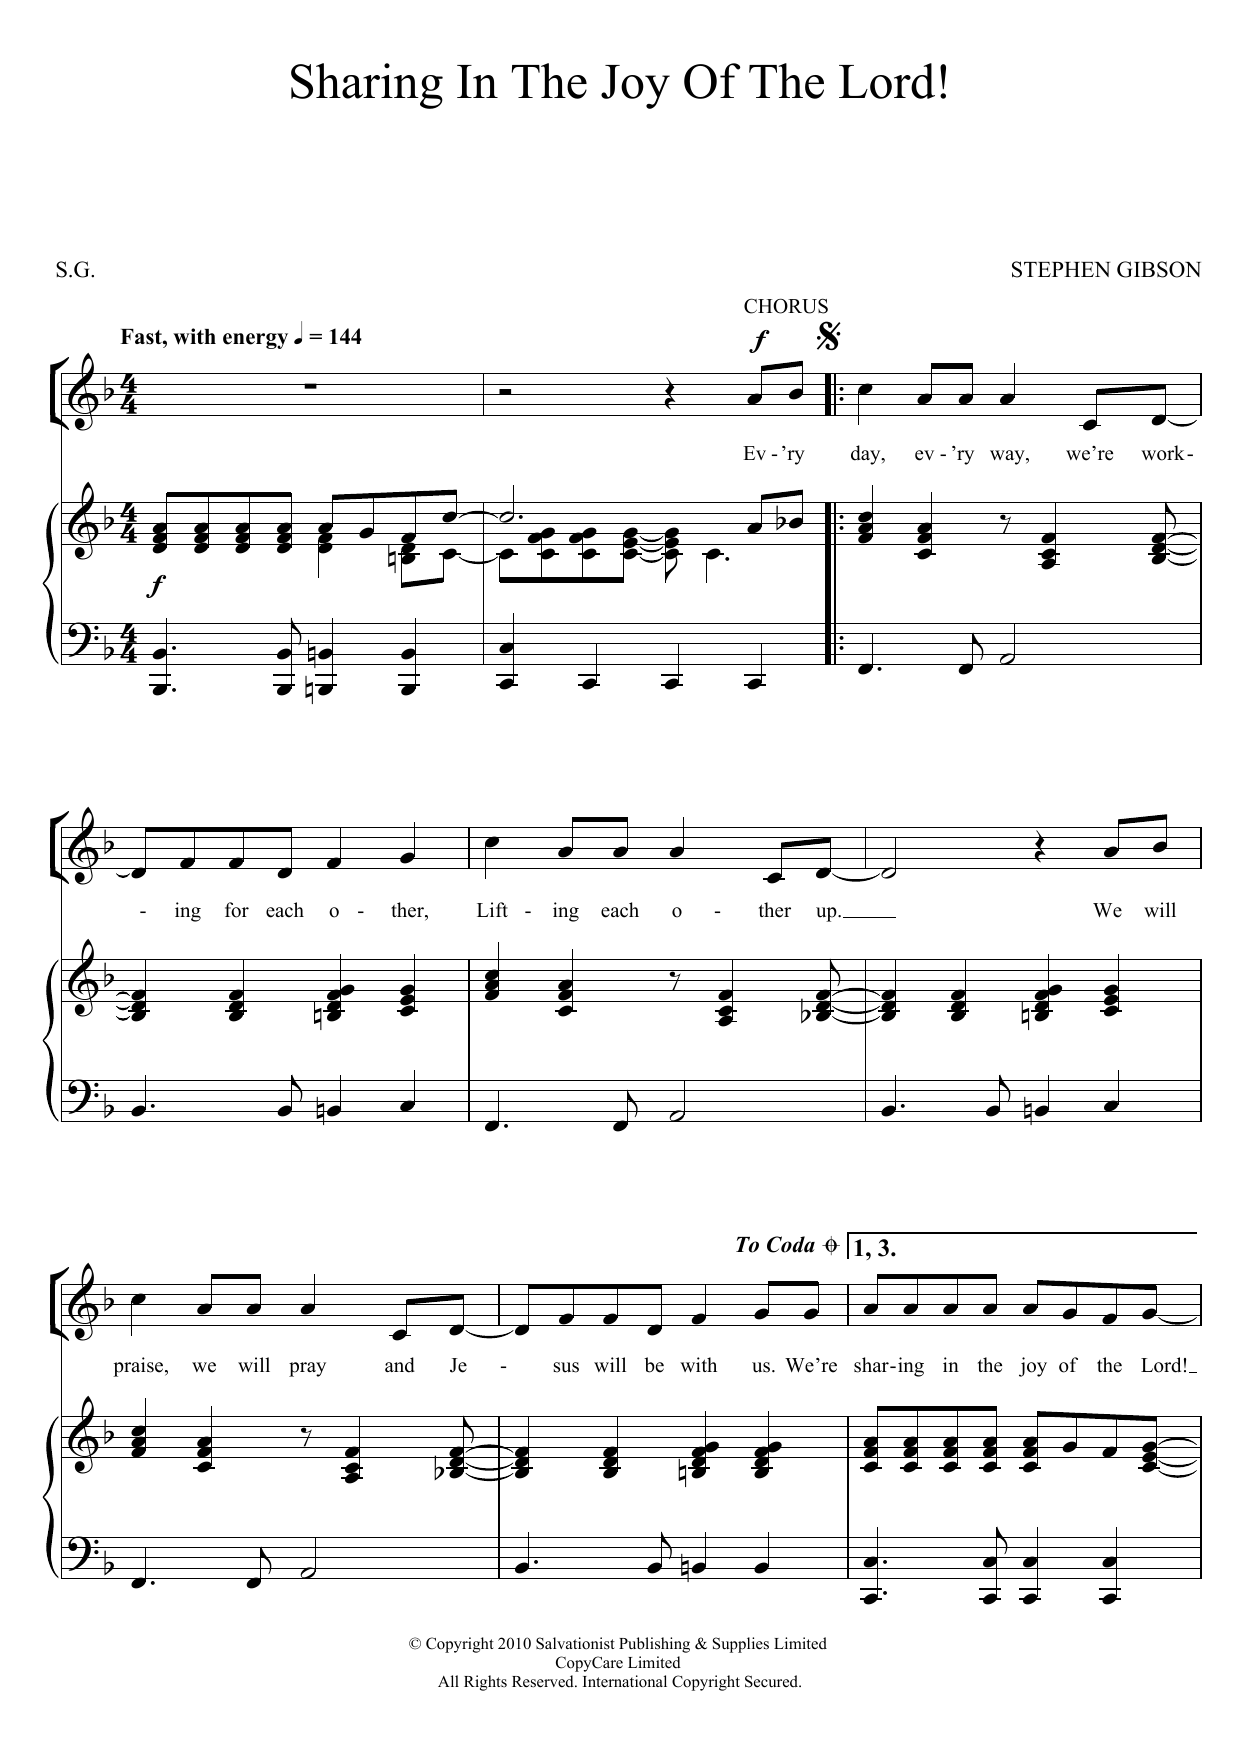 Download The Salvation Army Sharing In The Joy Of The Lord Sheet Music